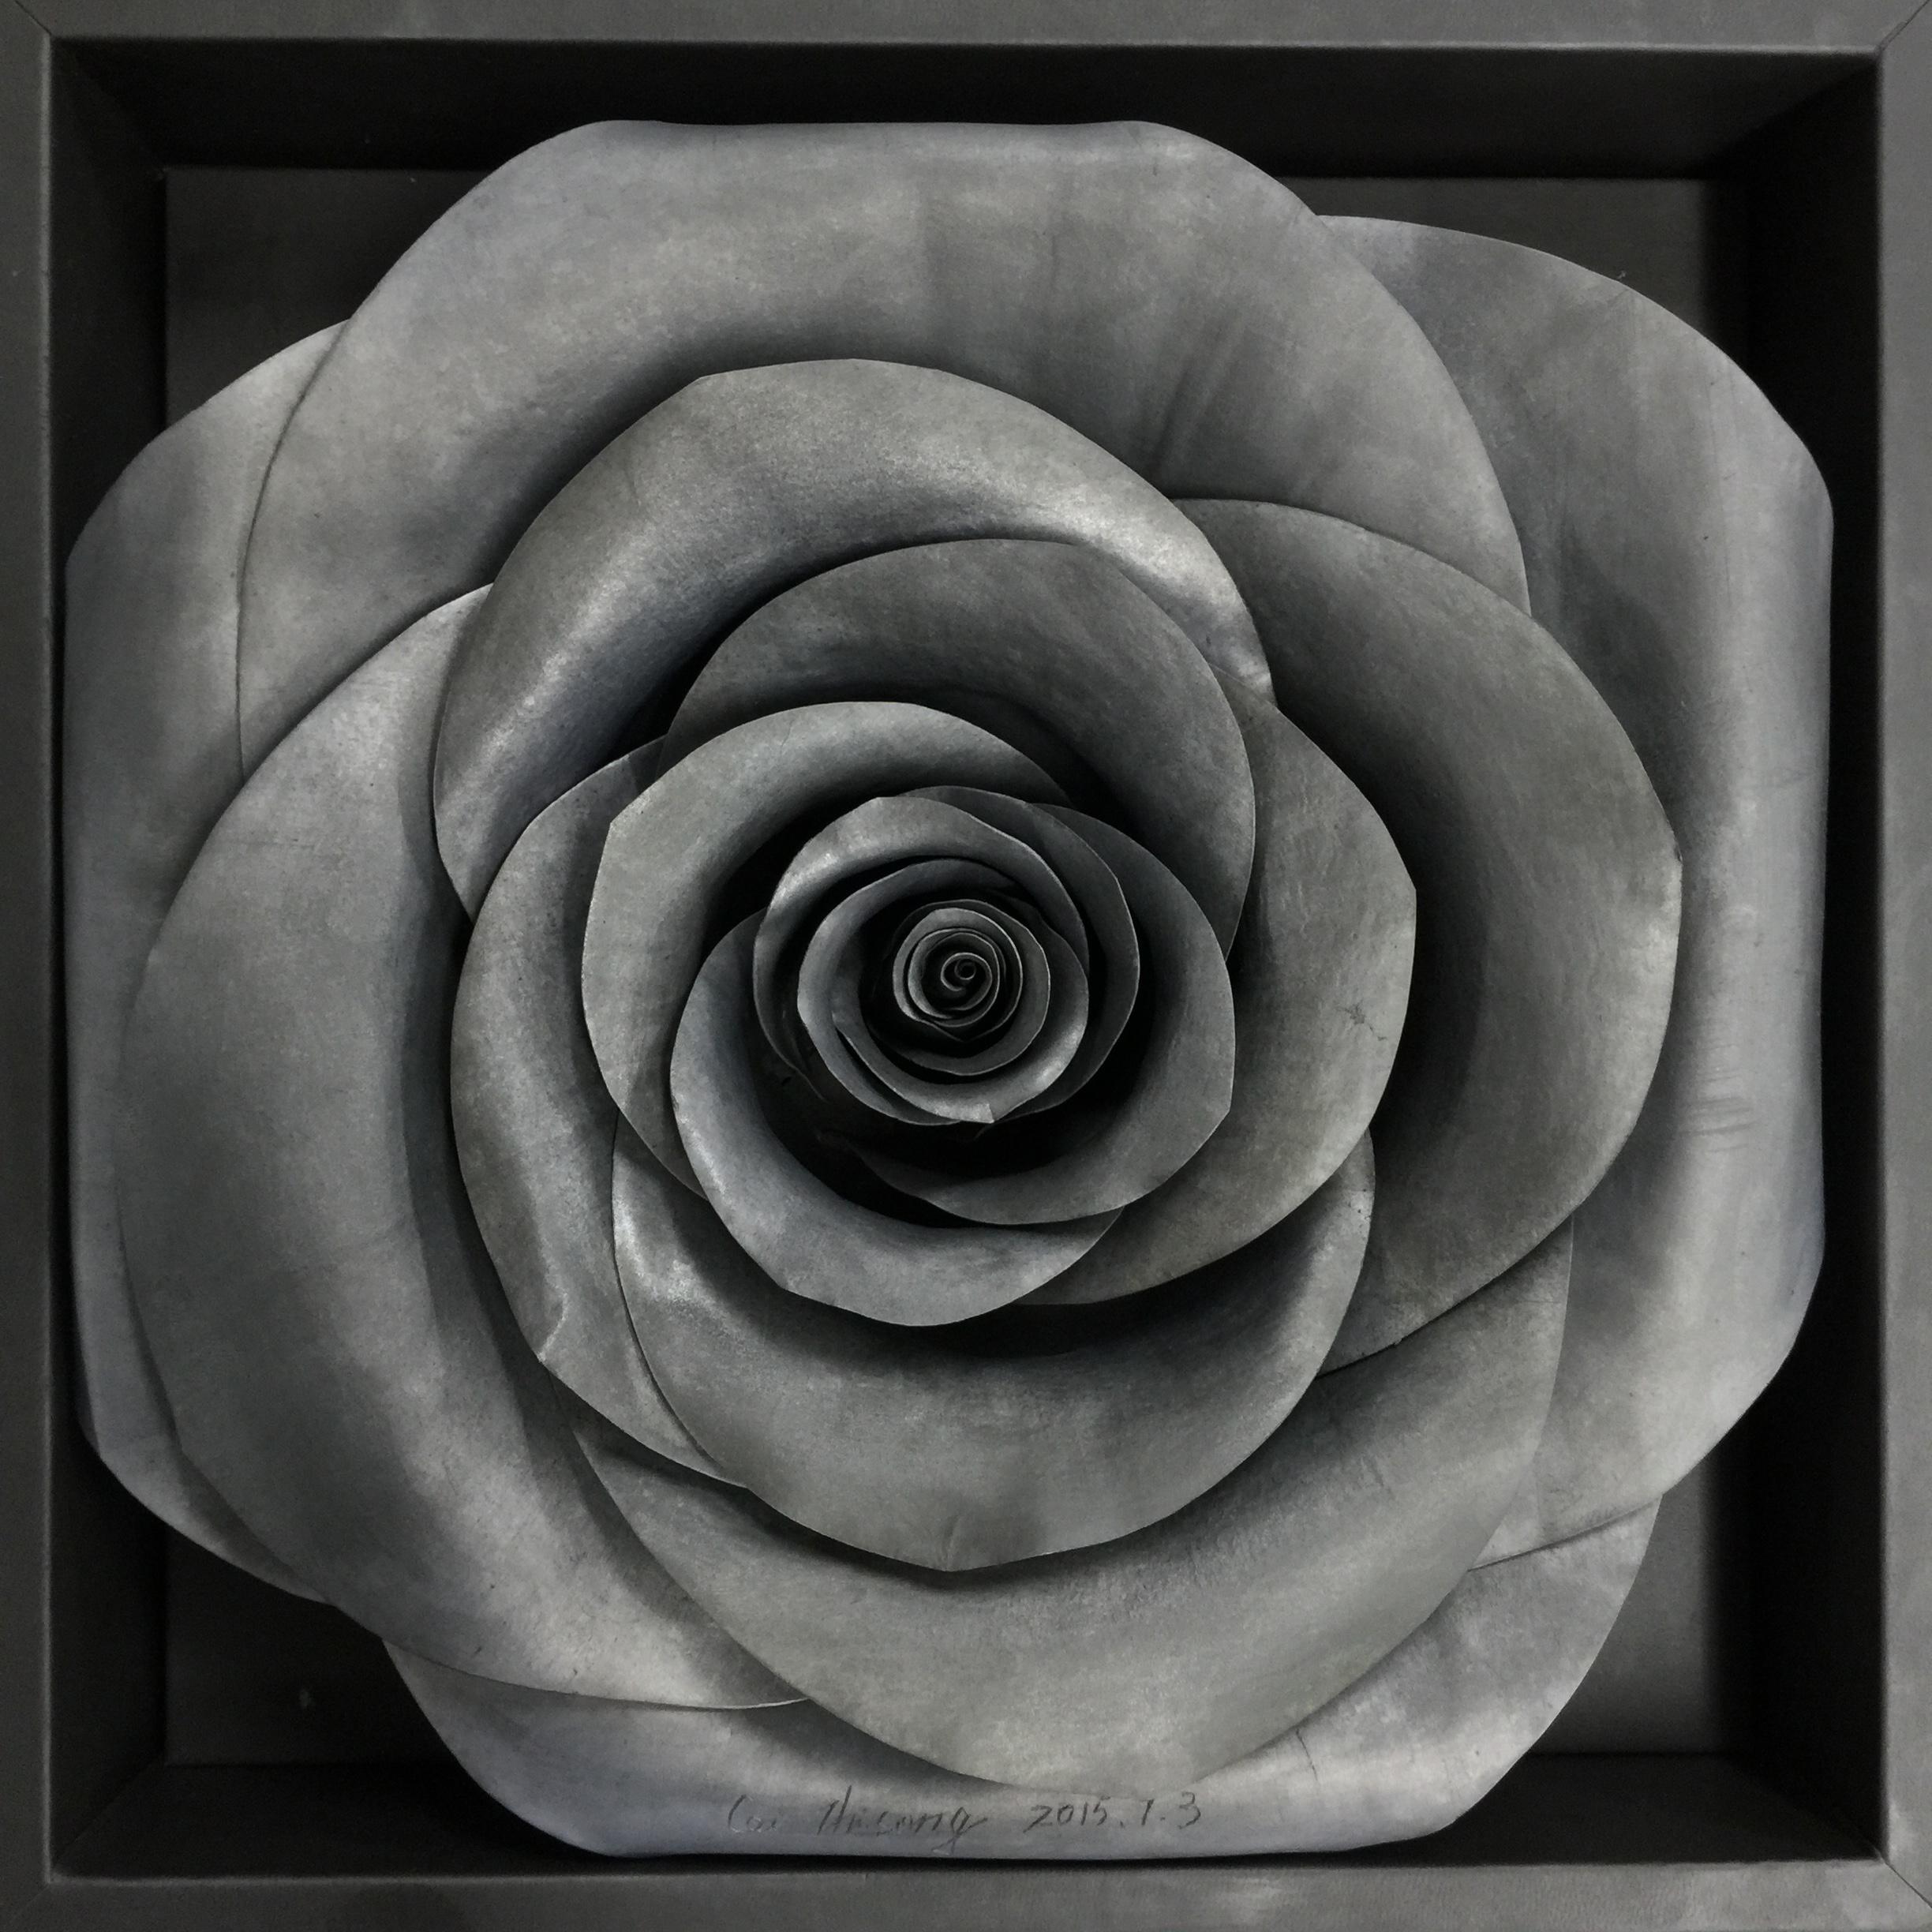 Cai Zhisong Still-Life Sculpture - Square Rose on the Wall